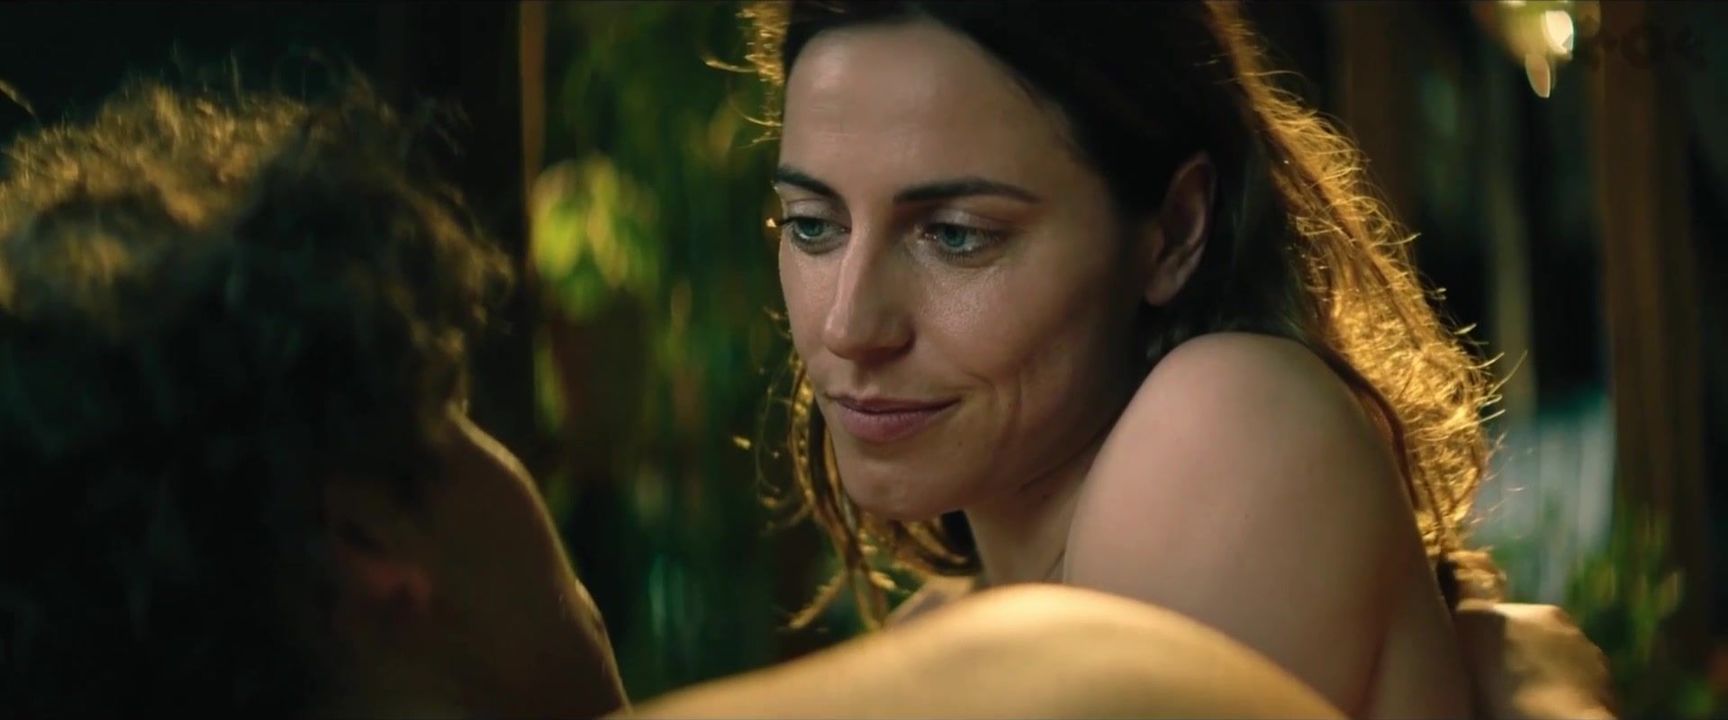 Nackt antje traue Antje Traue